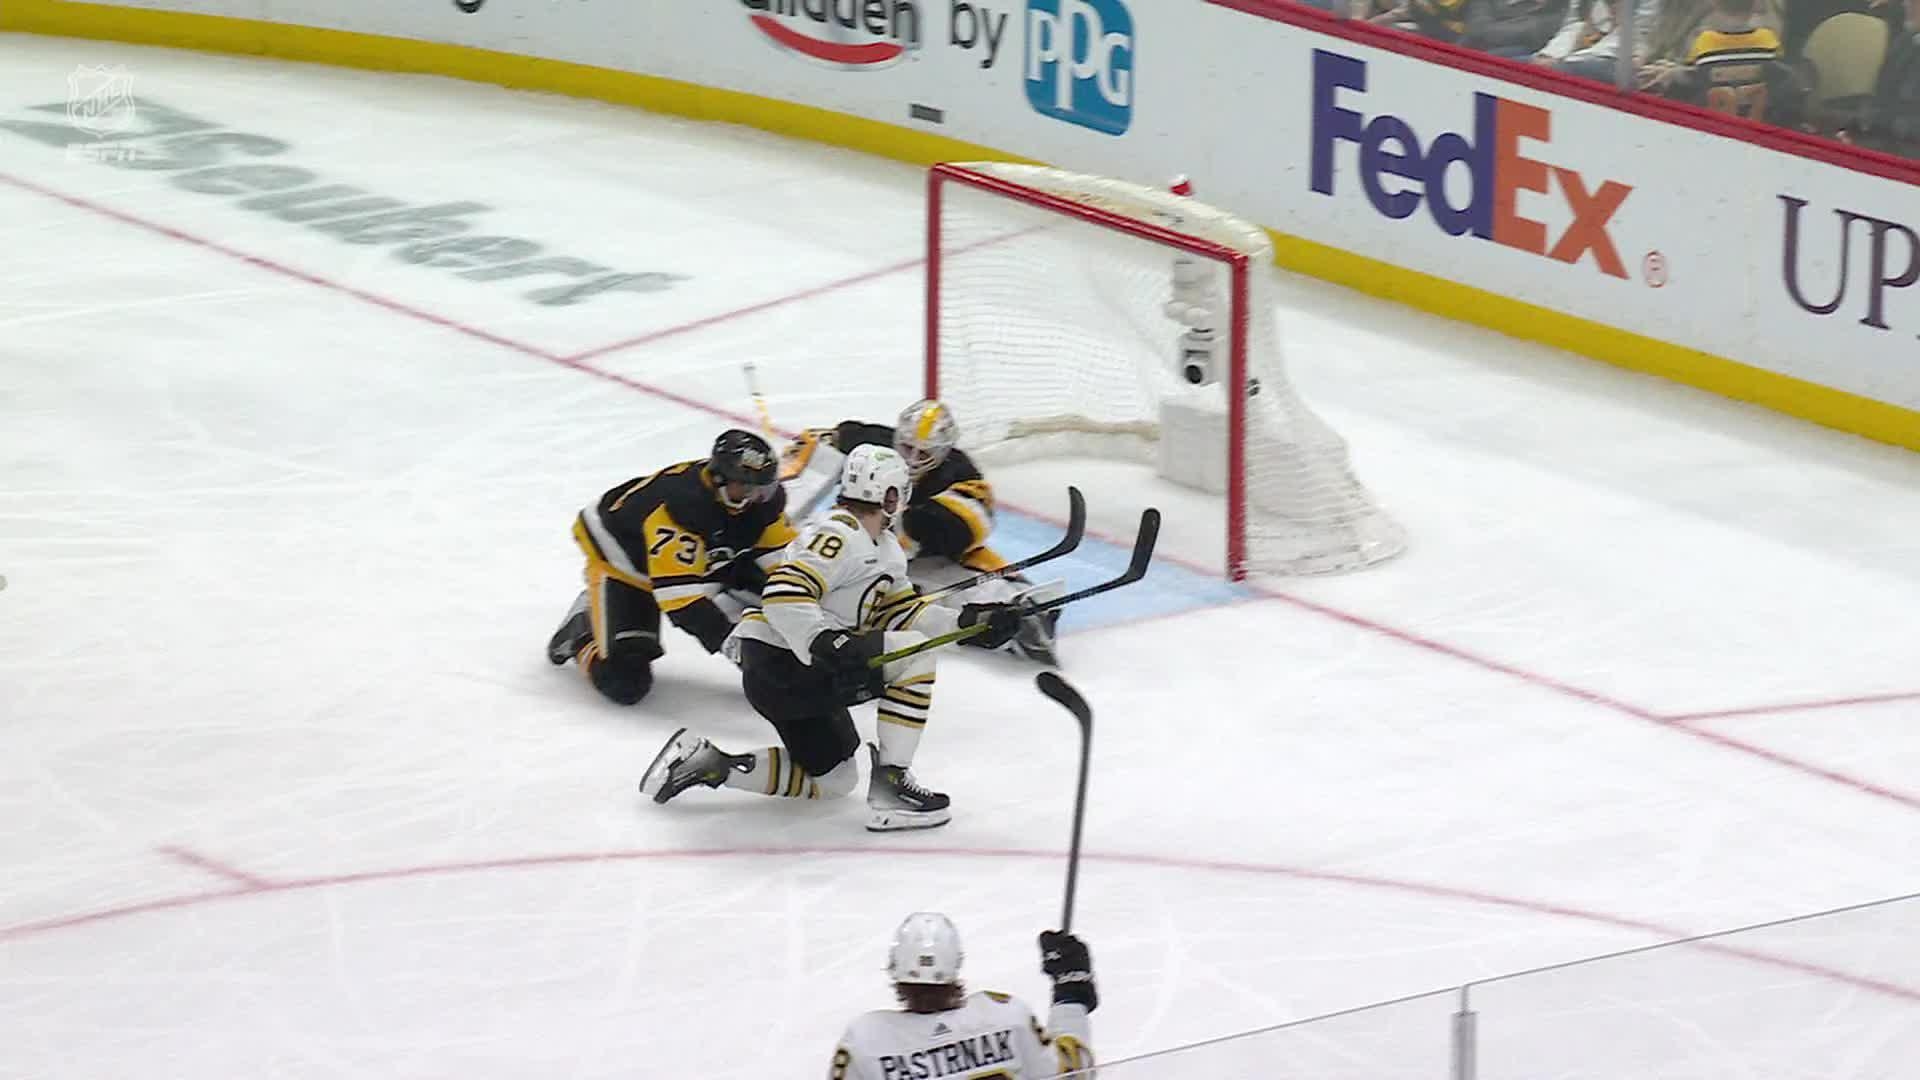 Bruins jump out to lead with 2 goals in 14 seconds